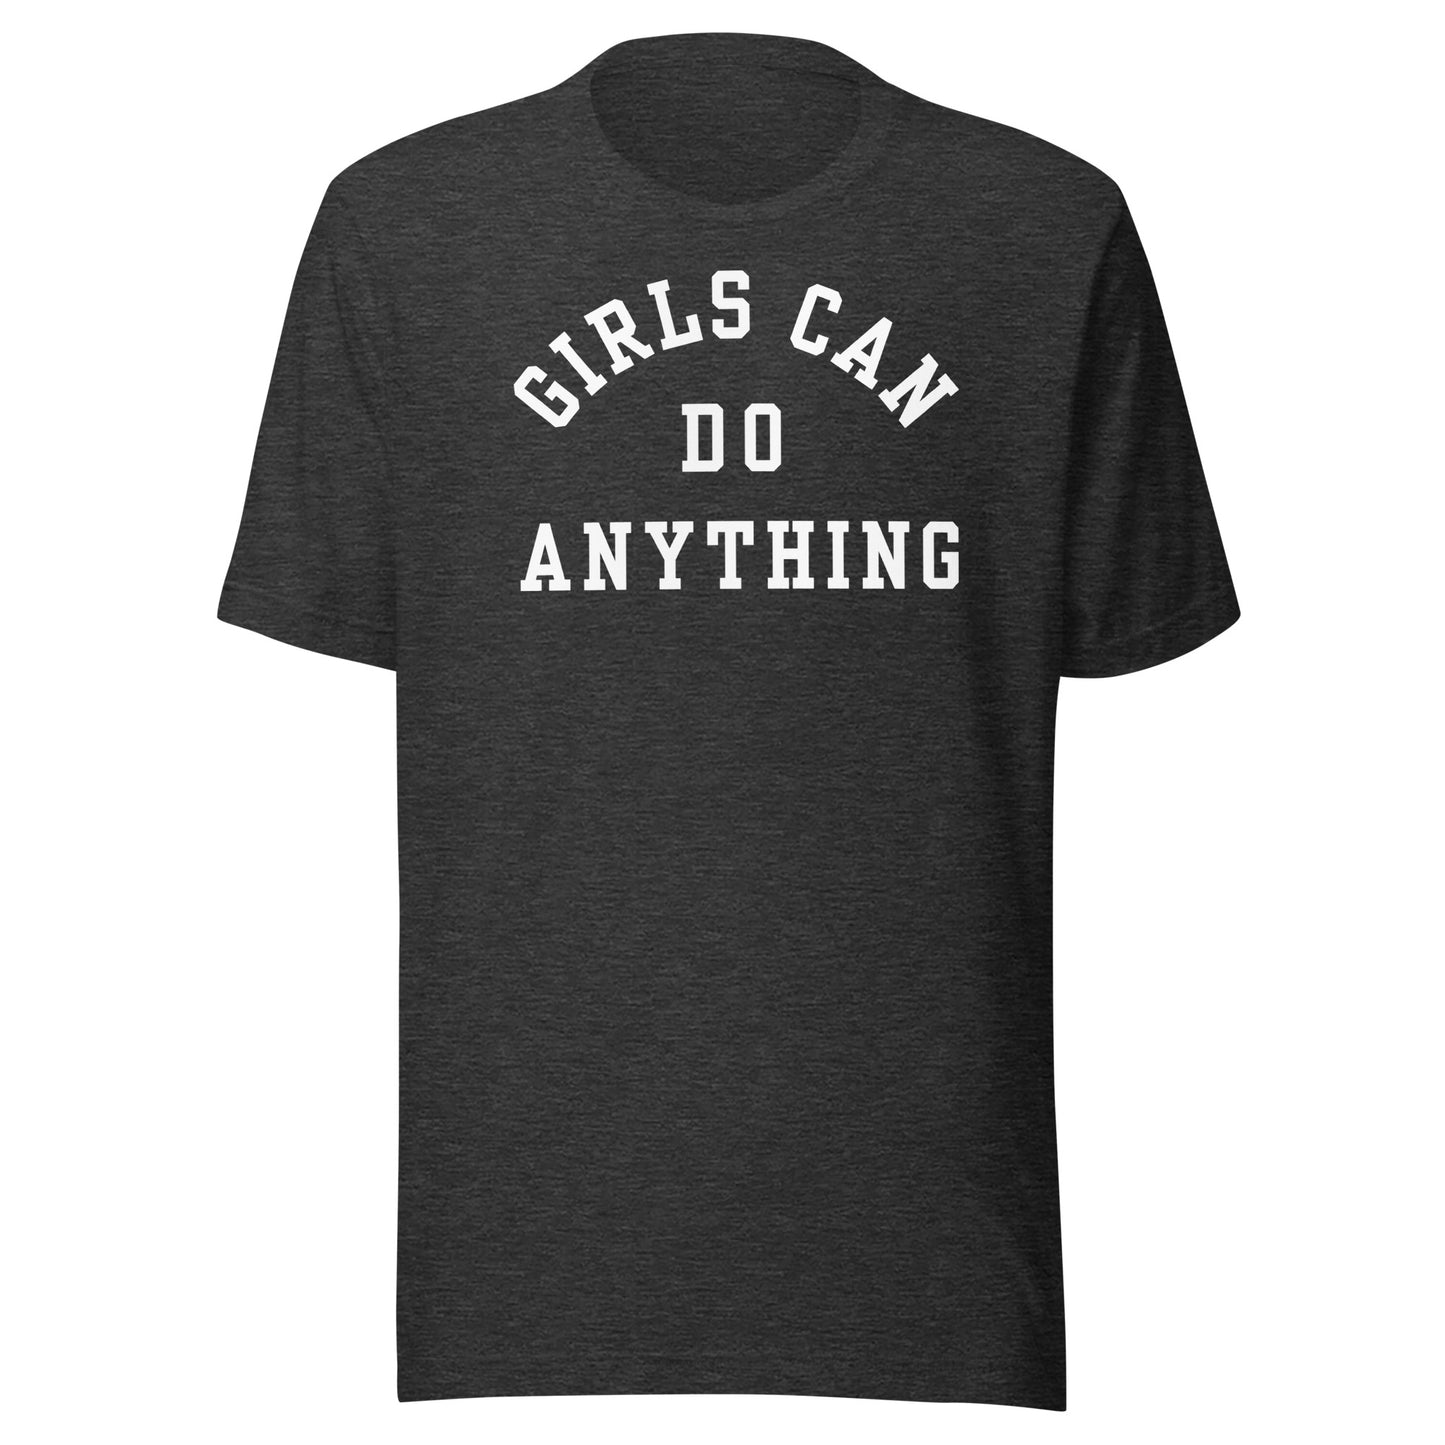 Girls Can Do Anything Tee